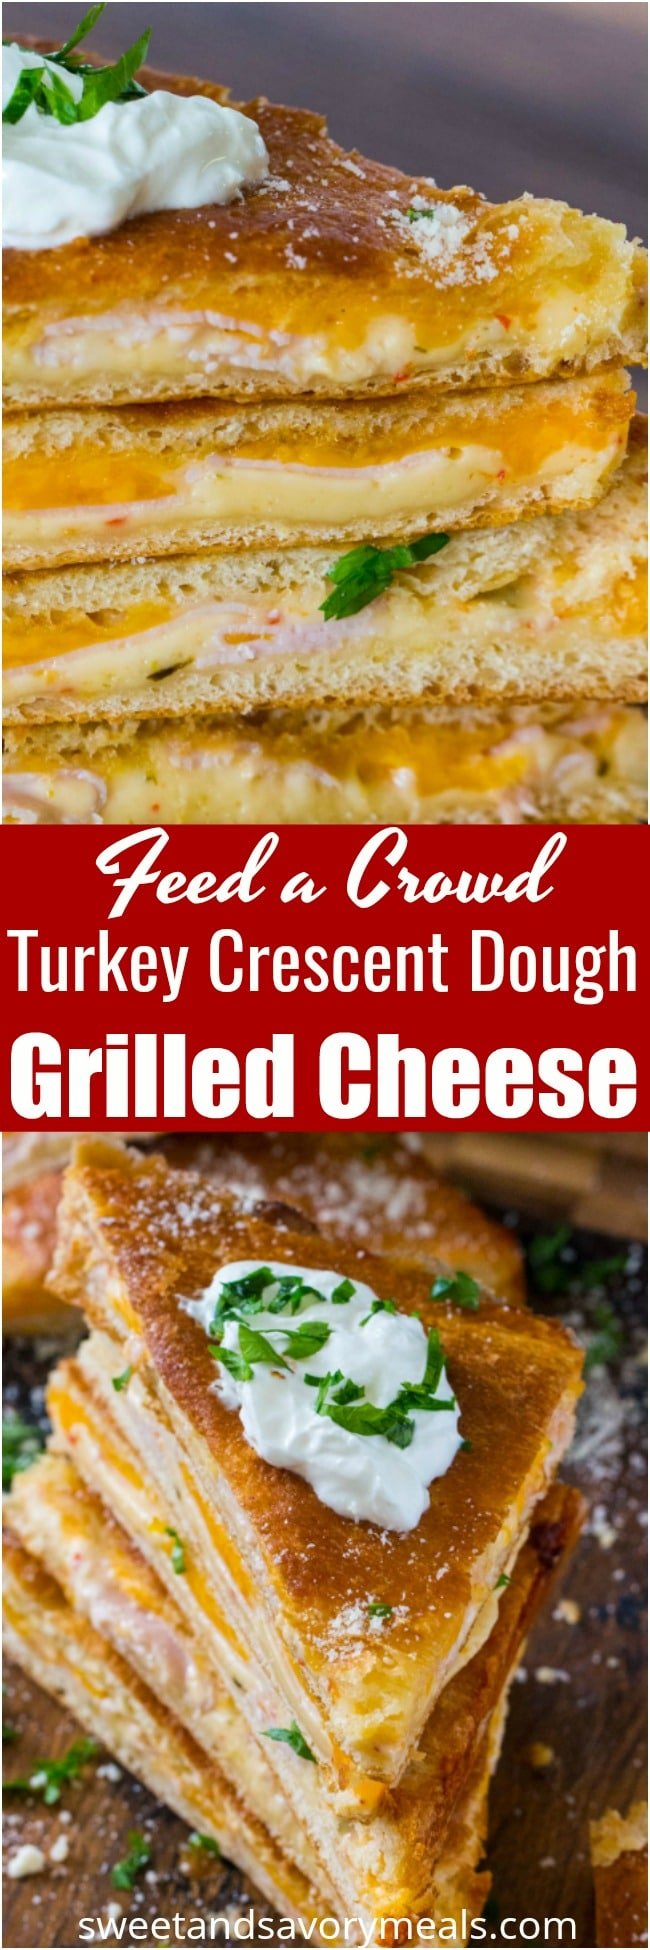 Baked Turkey Grilled Cheese made easy to cook in a large batch using crescent dough sheets. Delicious and fit to feed a crowd with minimum effort!